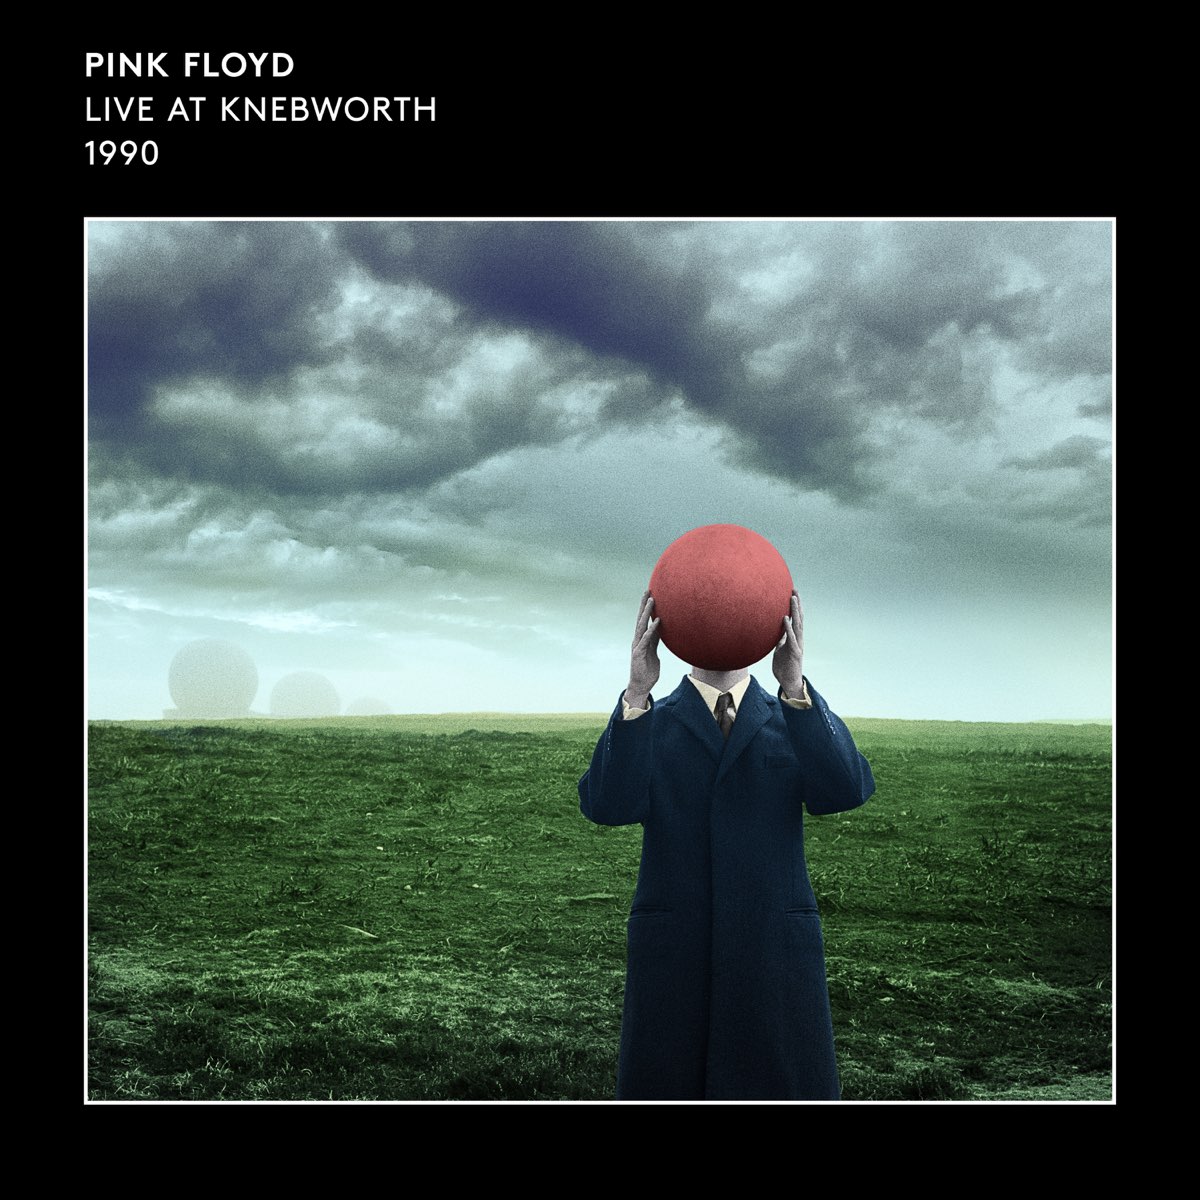 Shine On You Crazy Diamond (Pts. 1-5) - Single by Pink Floyd on Apple Music